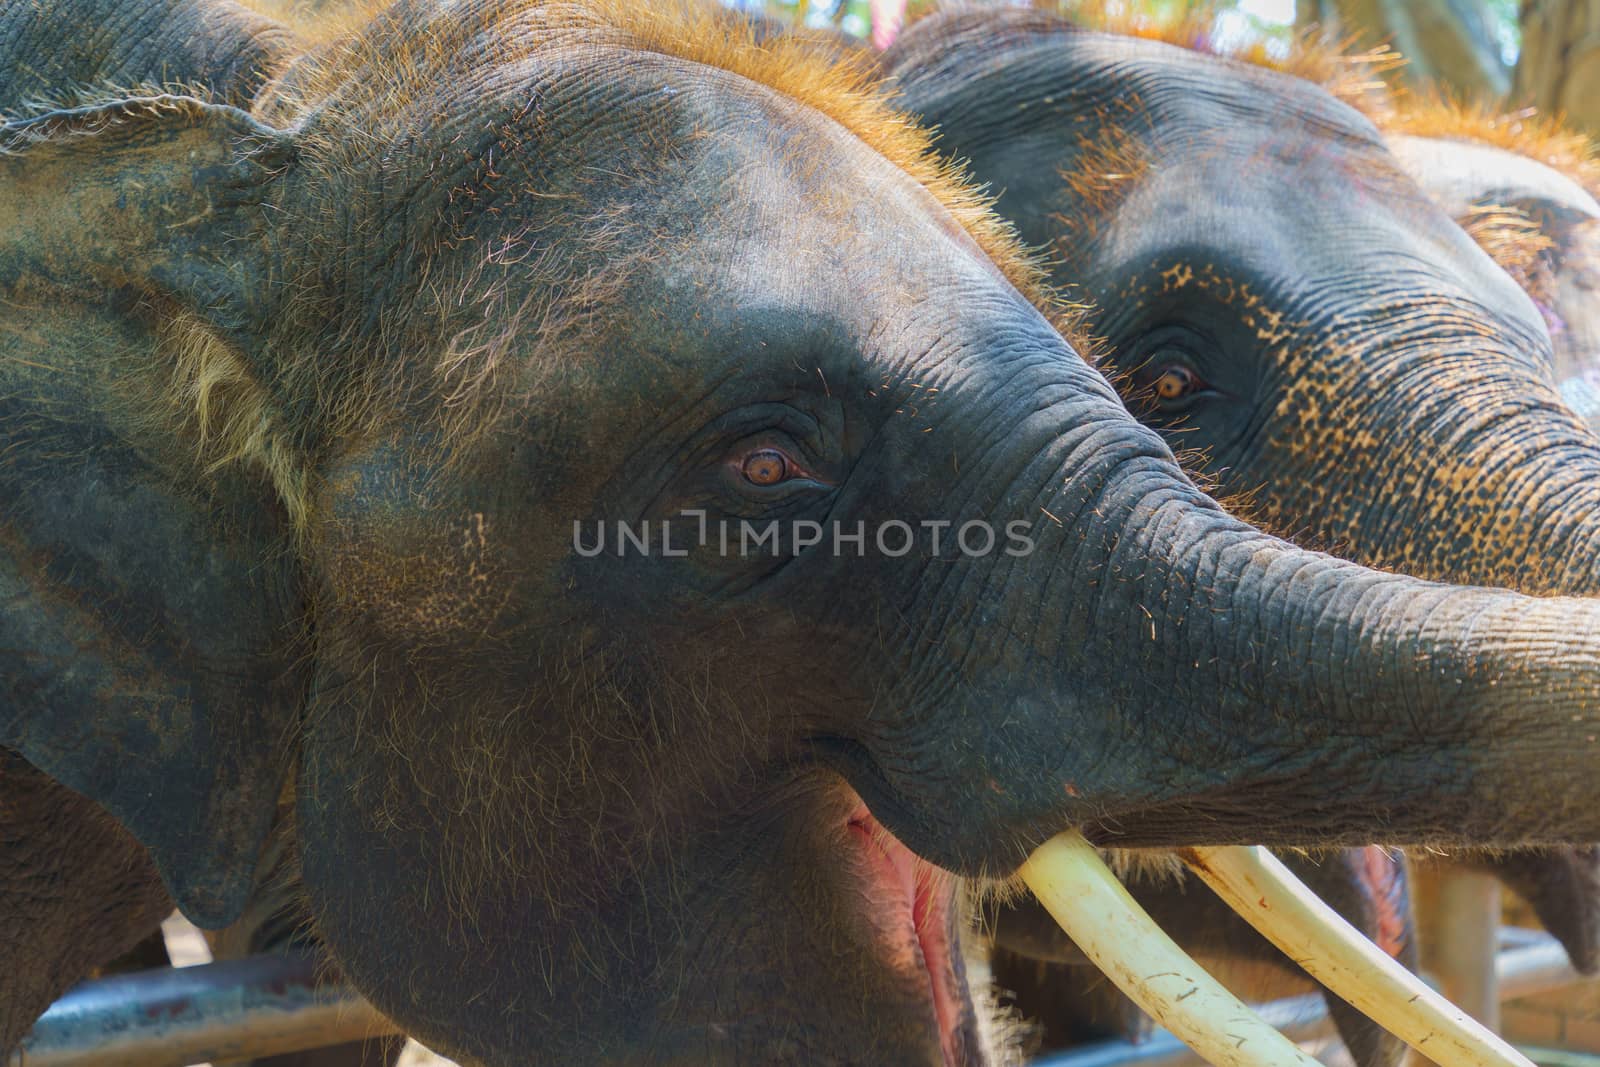 The big Thai elephant maximus indicus Cuvier is opening his mouth for food.